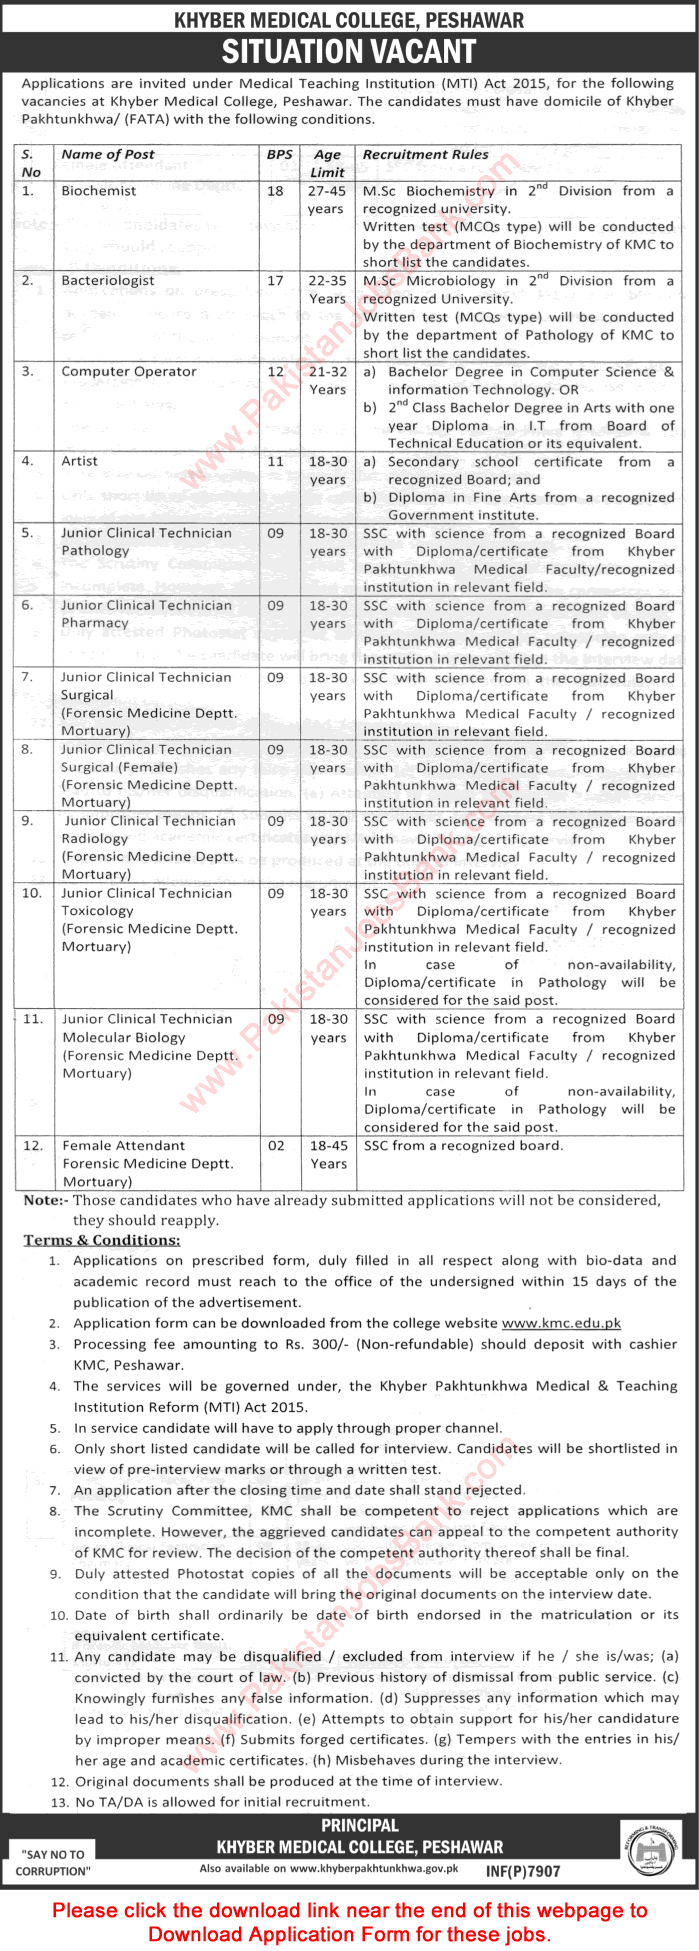 Khyber Medical College Peshawar Jobs 2017 Application Form Clinical Technicians & Others Latest